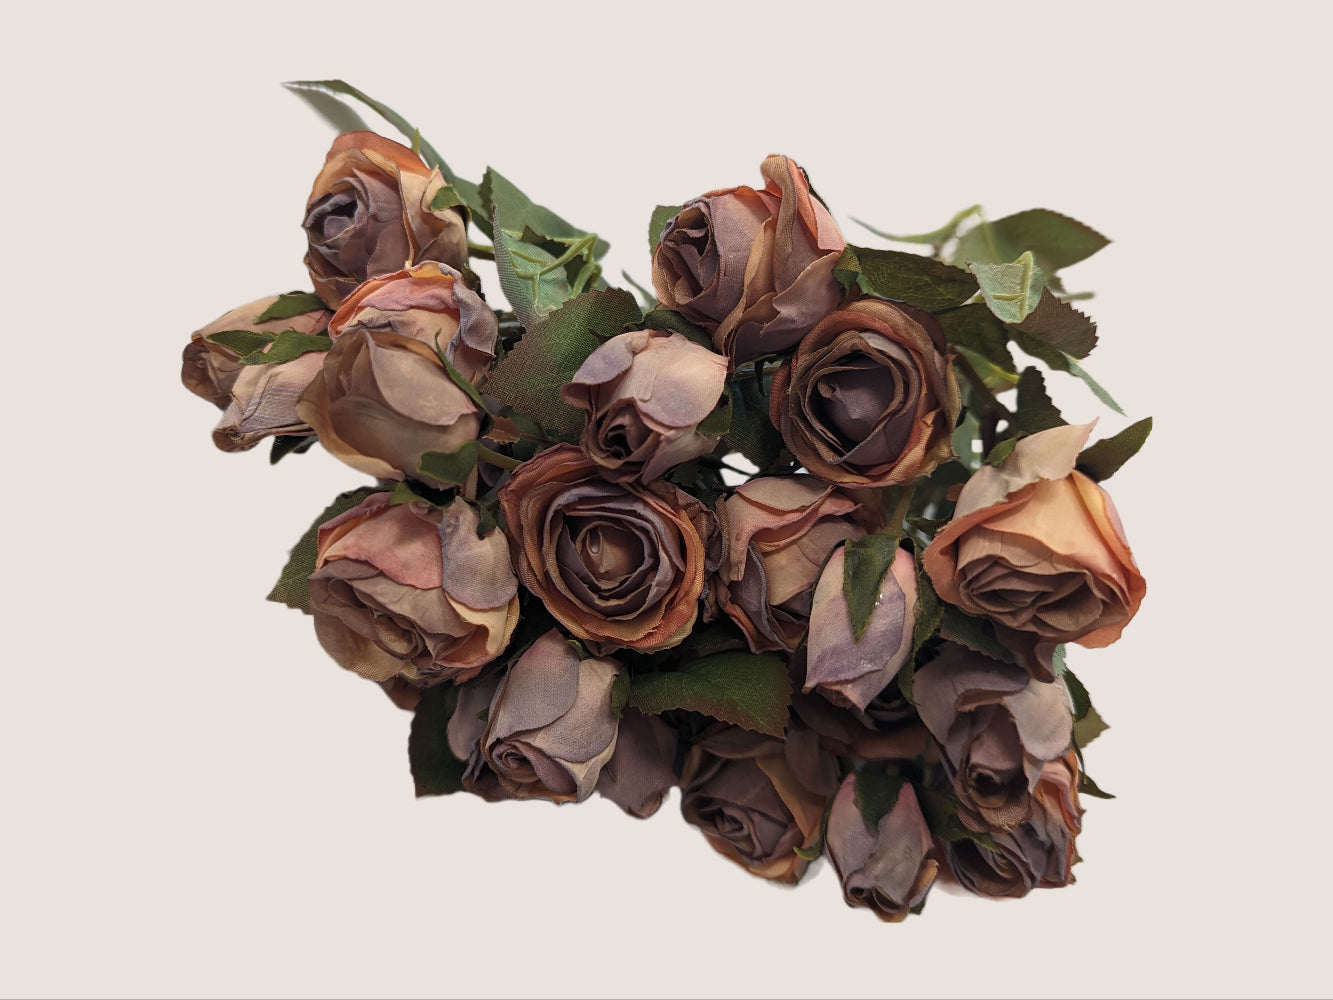 Artificial rose bouquet crafted to look preserved, with 5 stems each containing 5 flower heads in mauve pink, purples, and light browns creating a dried look. Each stem is 17 inches with a green to brown gradient, serrated leaves with dark red tips, and small artificial buds adding a lifelike look. The bouquet is pictured against a neutral beige background.